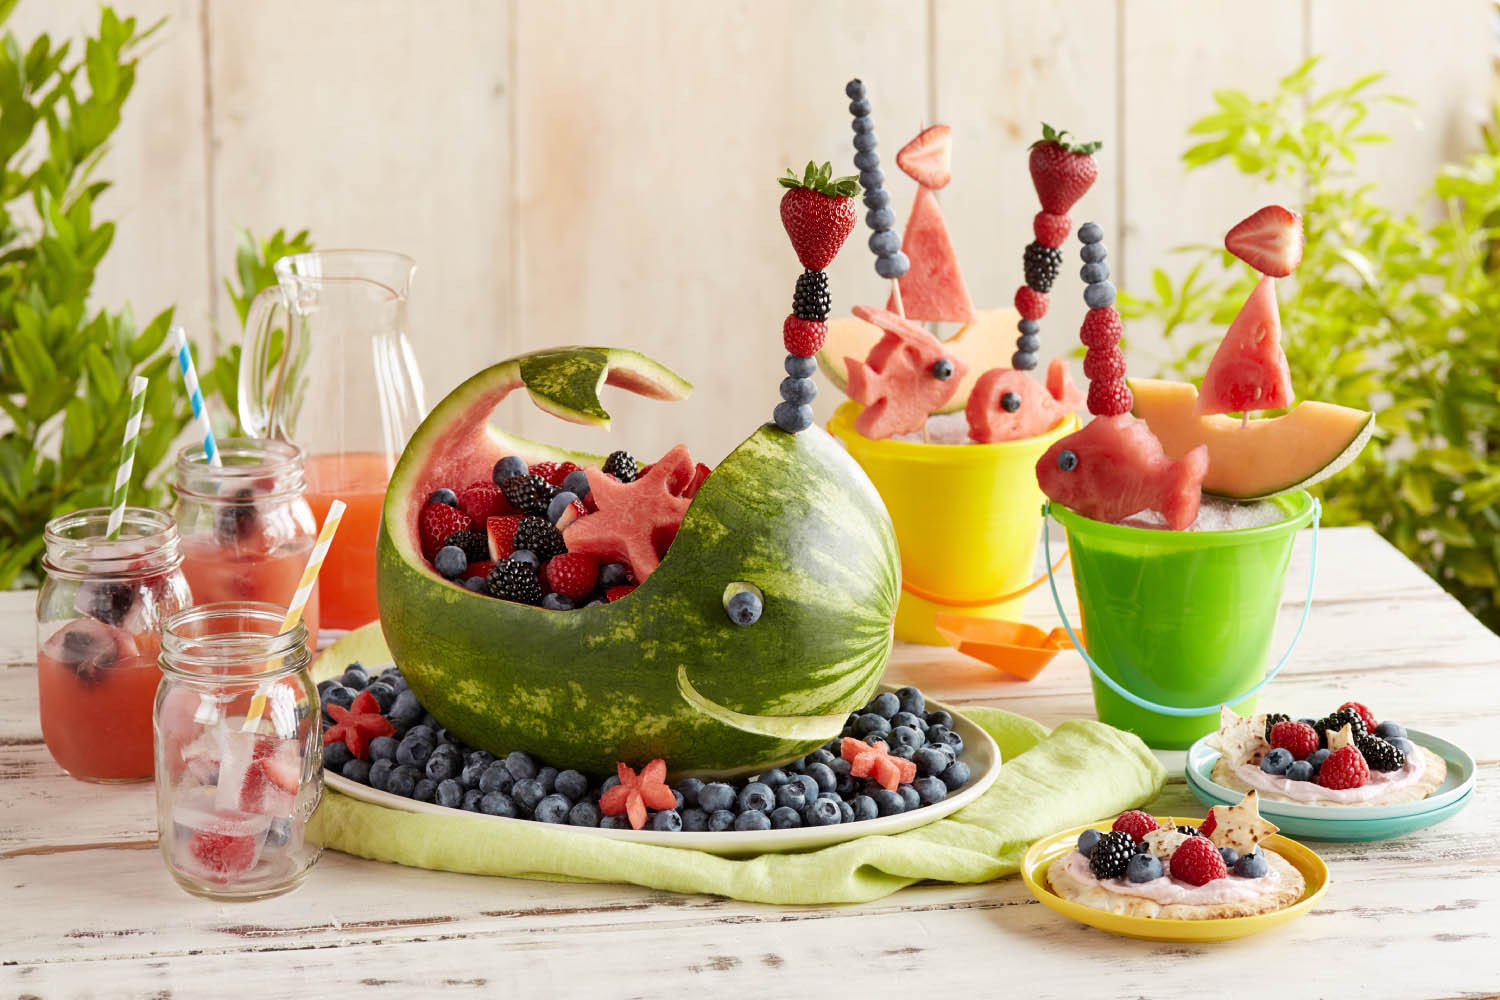 Beach Party Ideas Food
 Splash into Summer with a Berry Beach Party